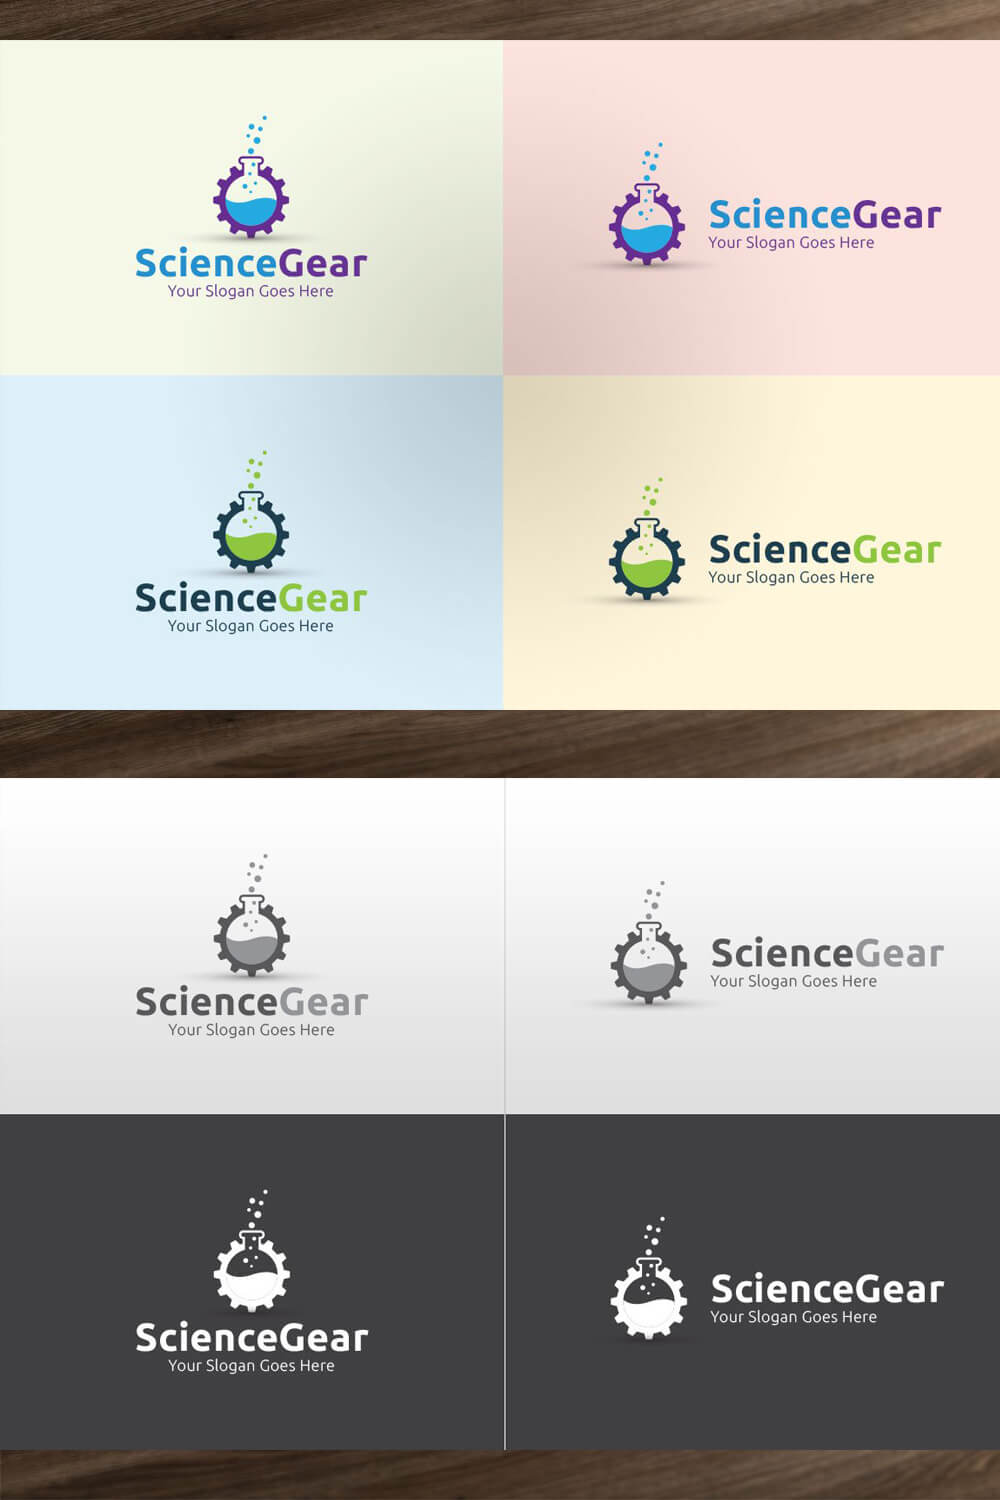 Four color logos "Science Gear" at the top and four black and white logos at the bottom of the picture.